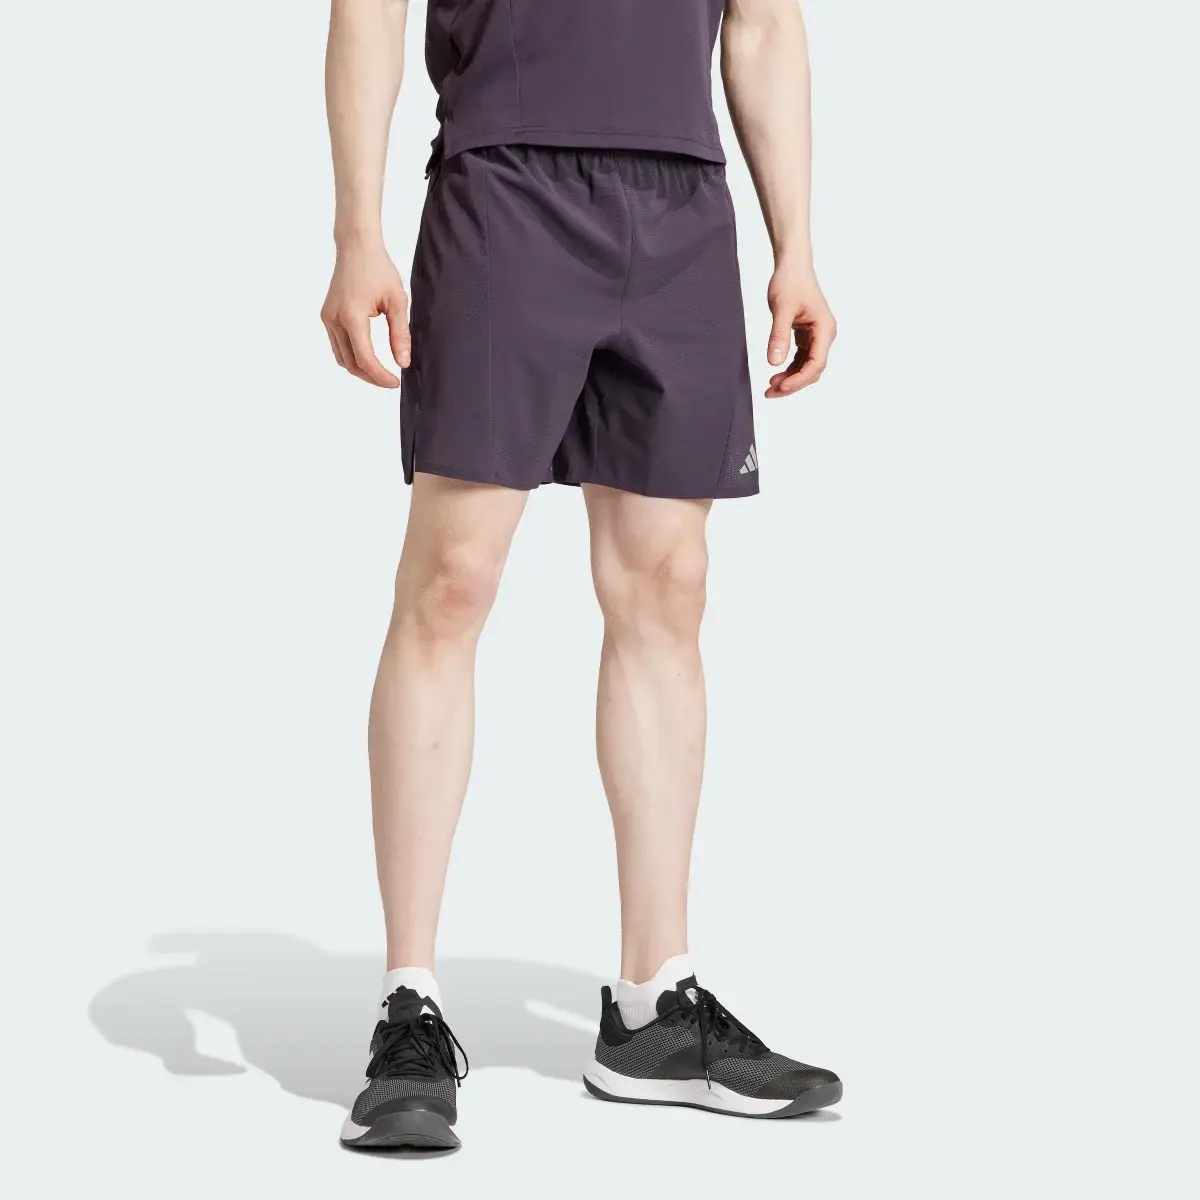 Adidas Designed for Training HIIT Workout HEAT.RDY Shorts. 1